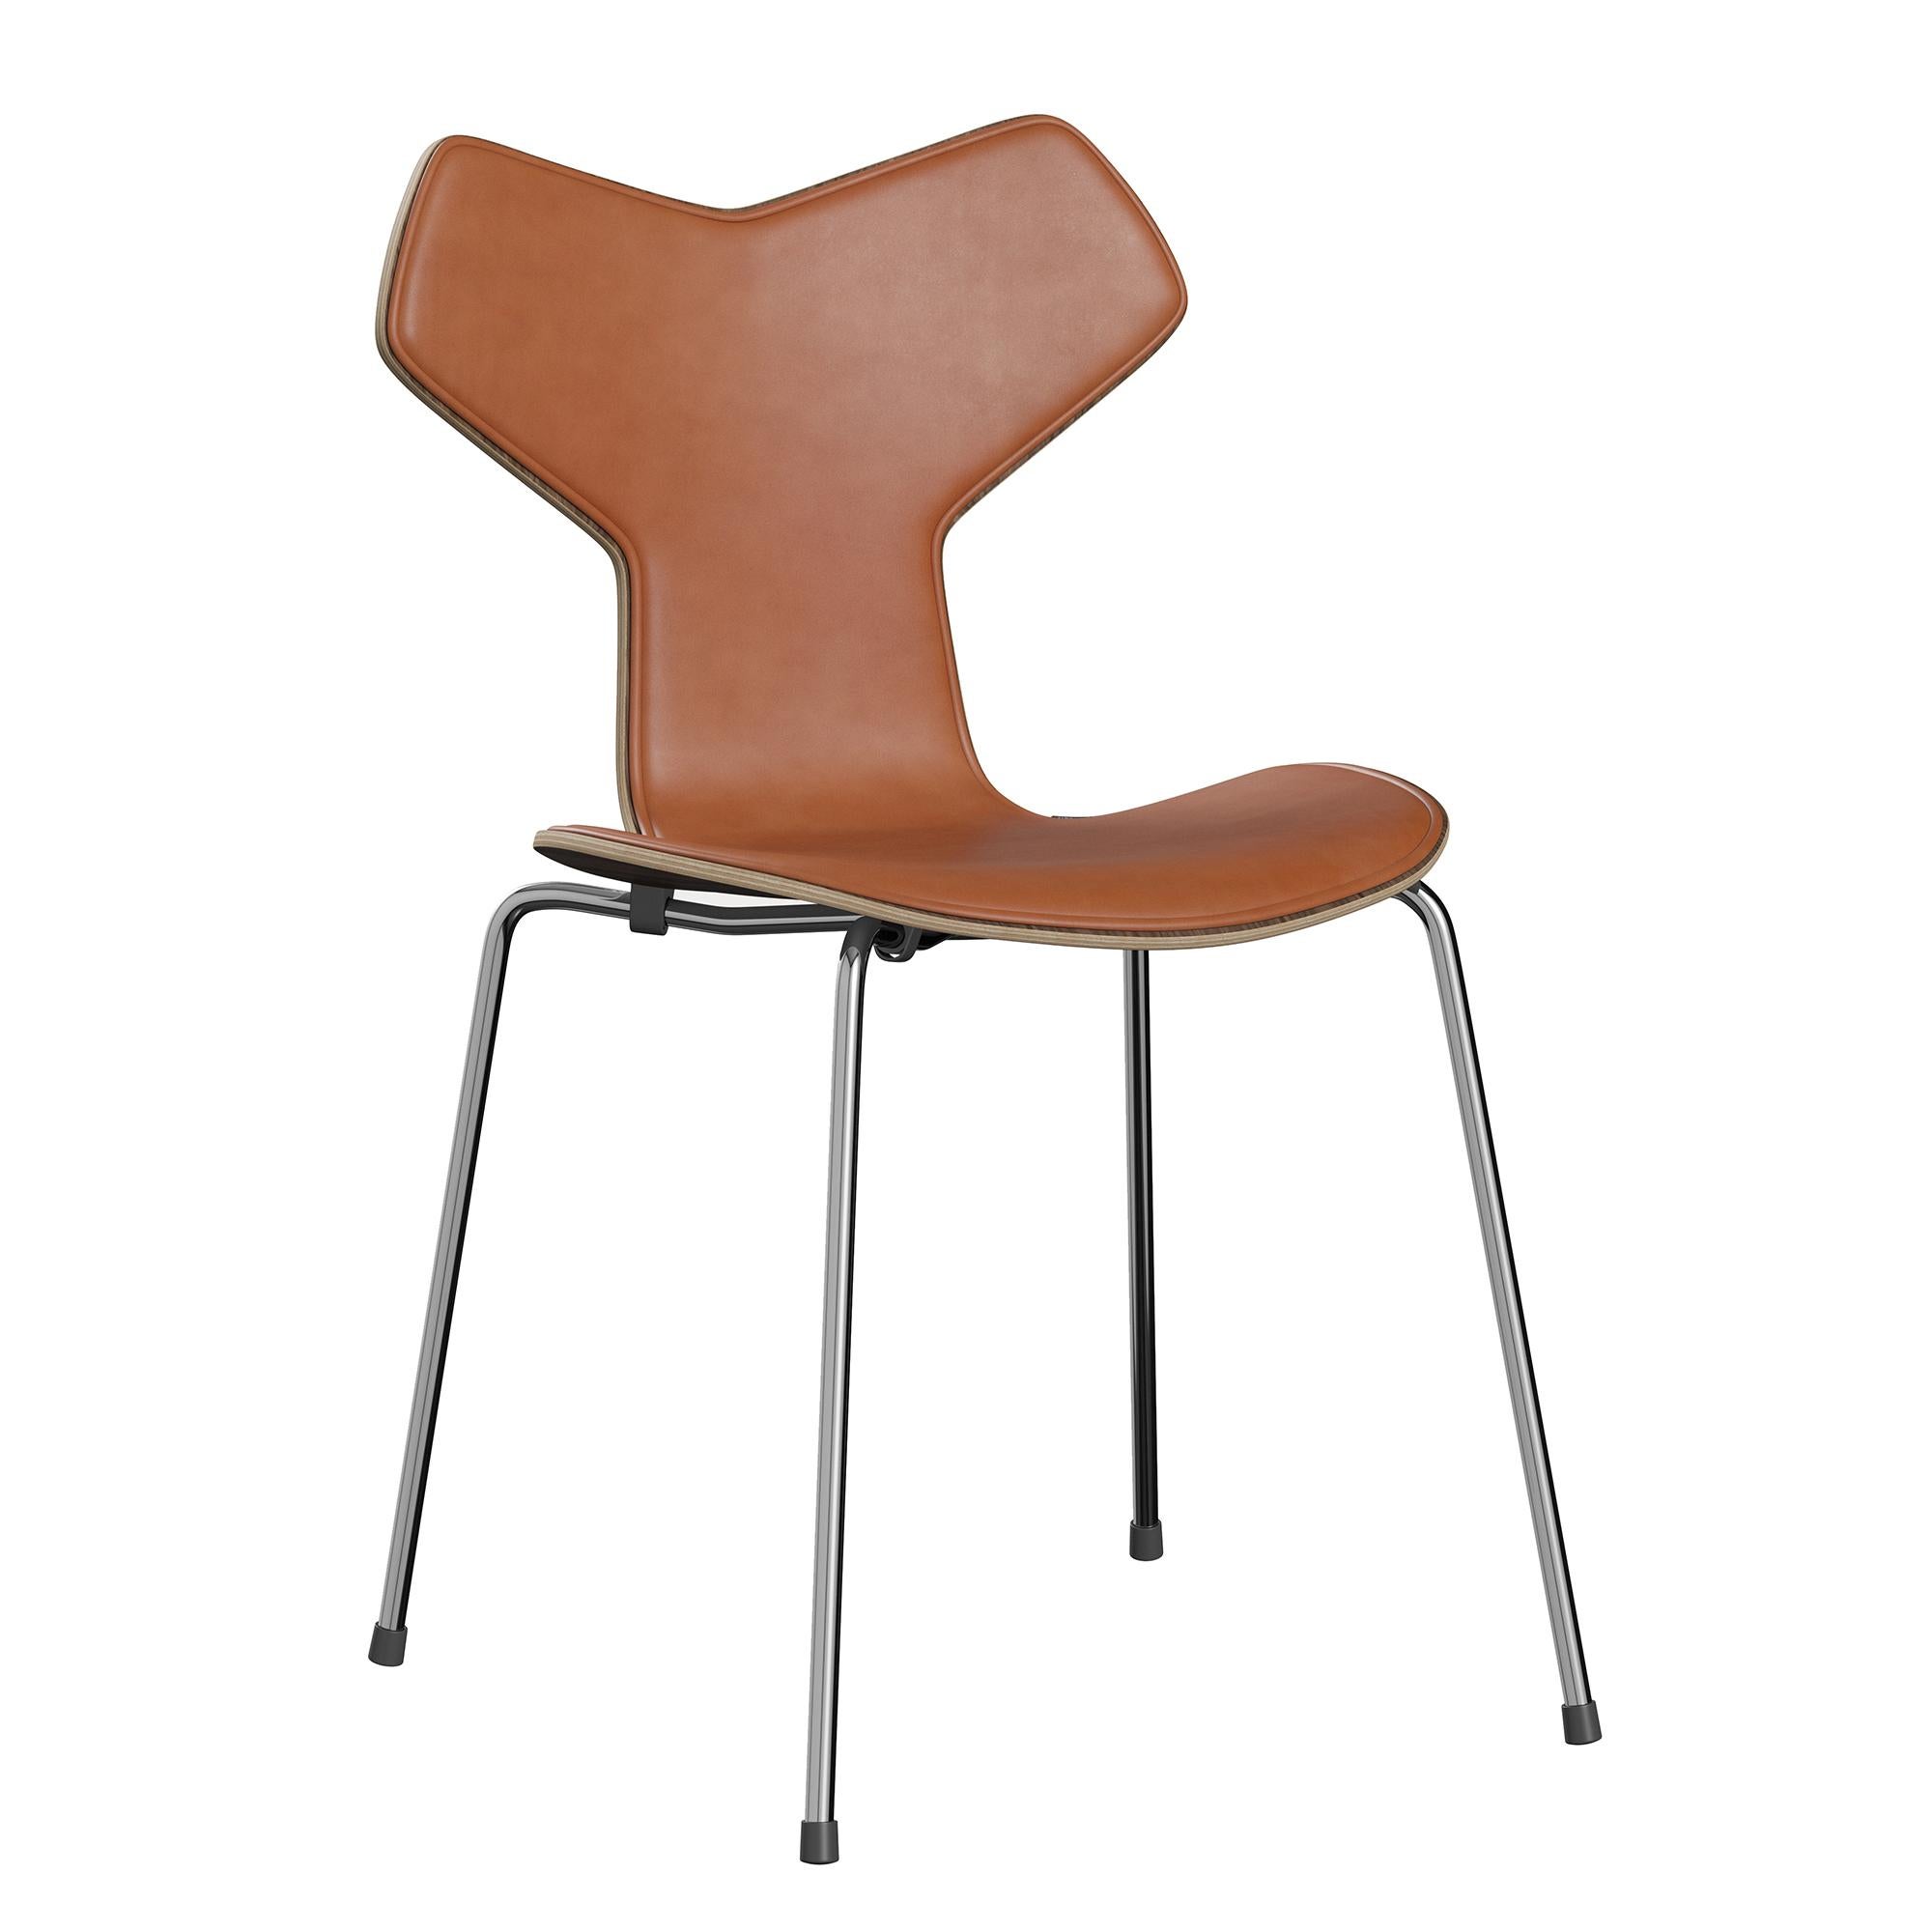 Arne Jacobsen 'Grand Prix' Chair for Fritz Hansen in Partial Leather Upholstery For Sale 6